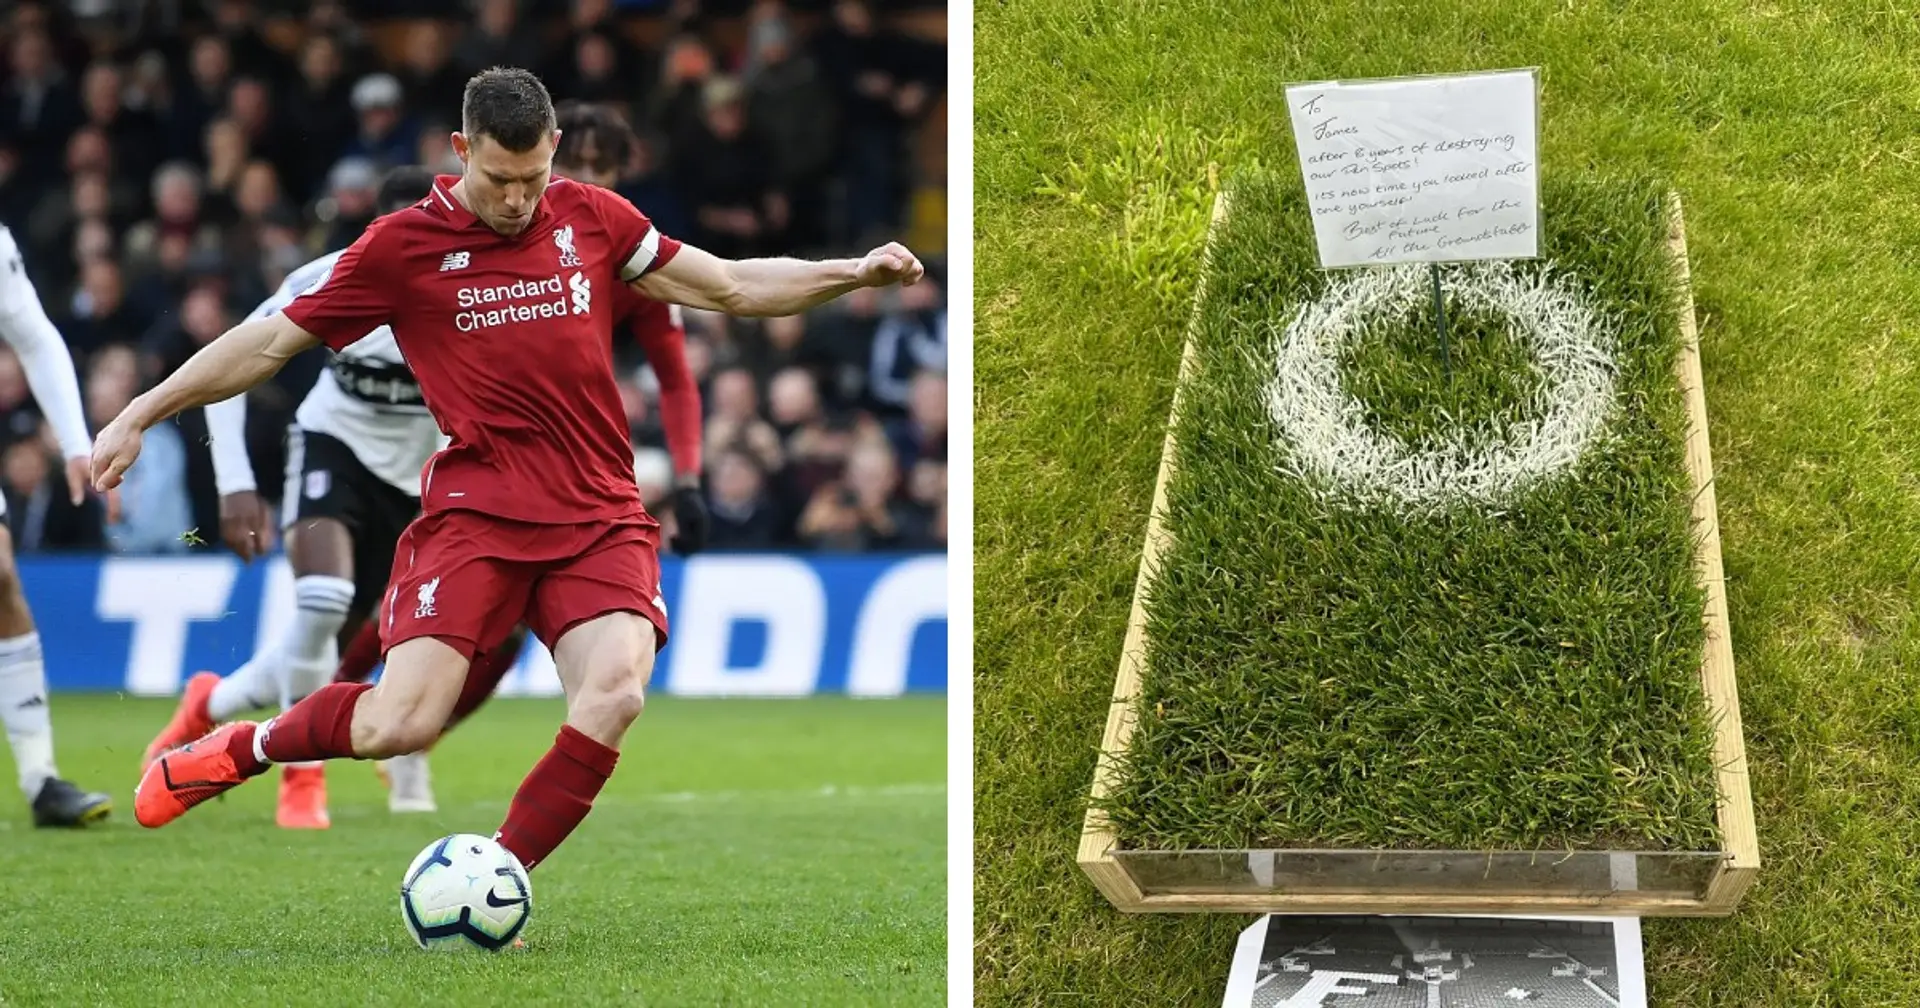 'After 8 years of destroying our penalty spots': Milner gifted thoughtful memento by Anfield groundskeepers